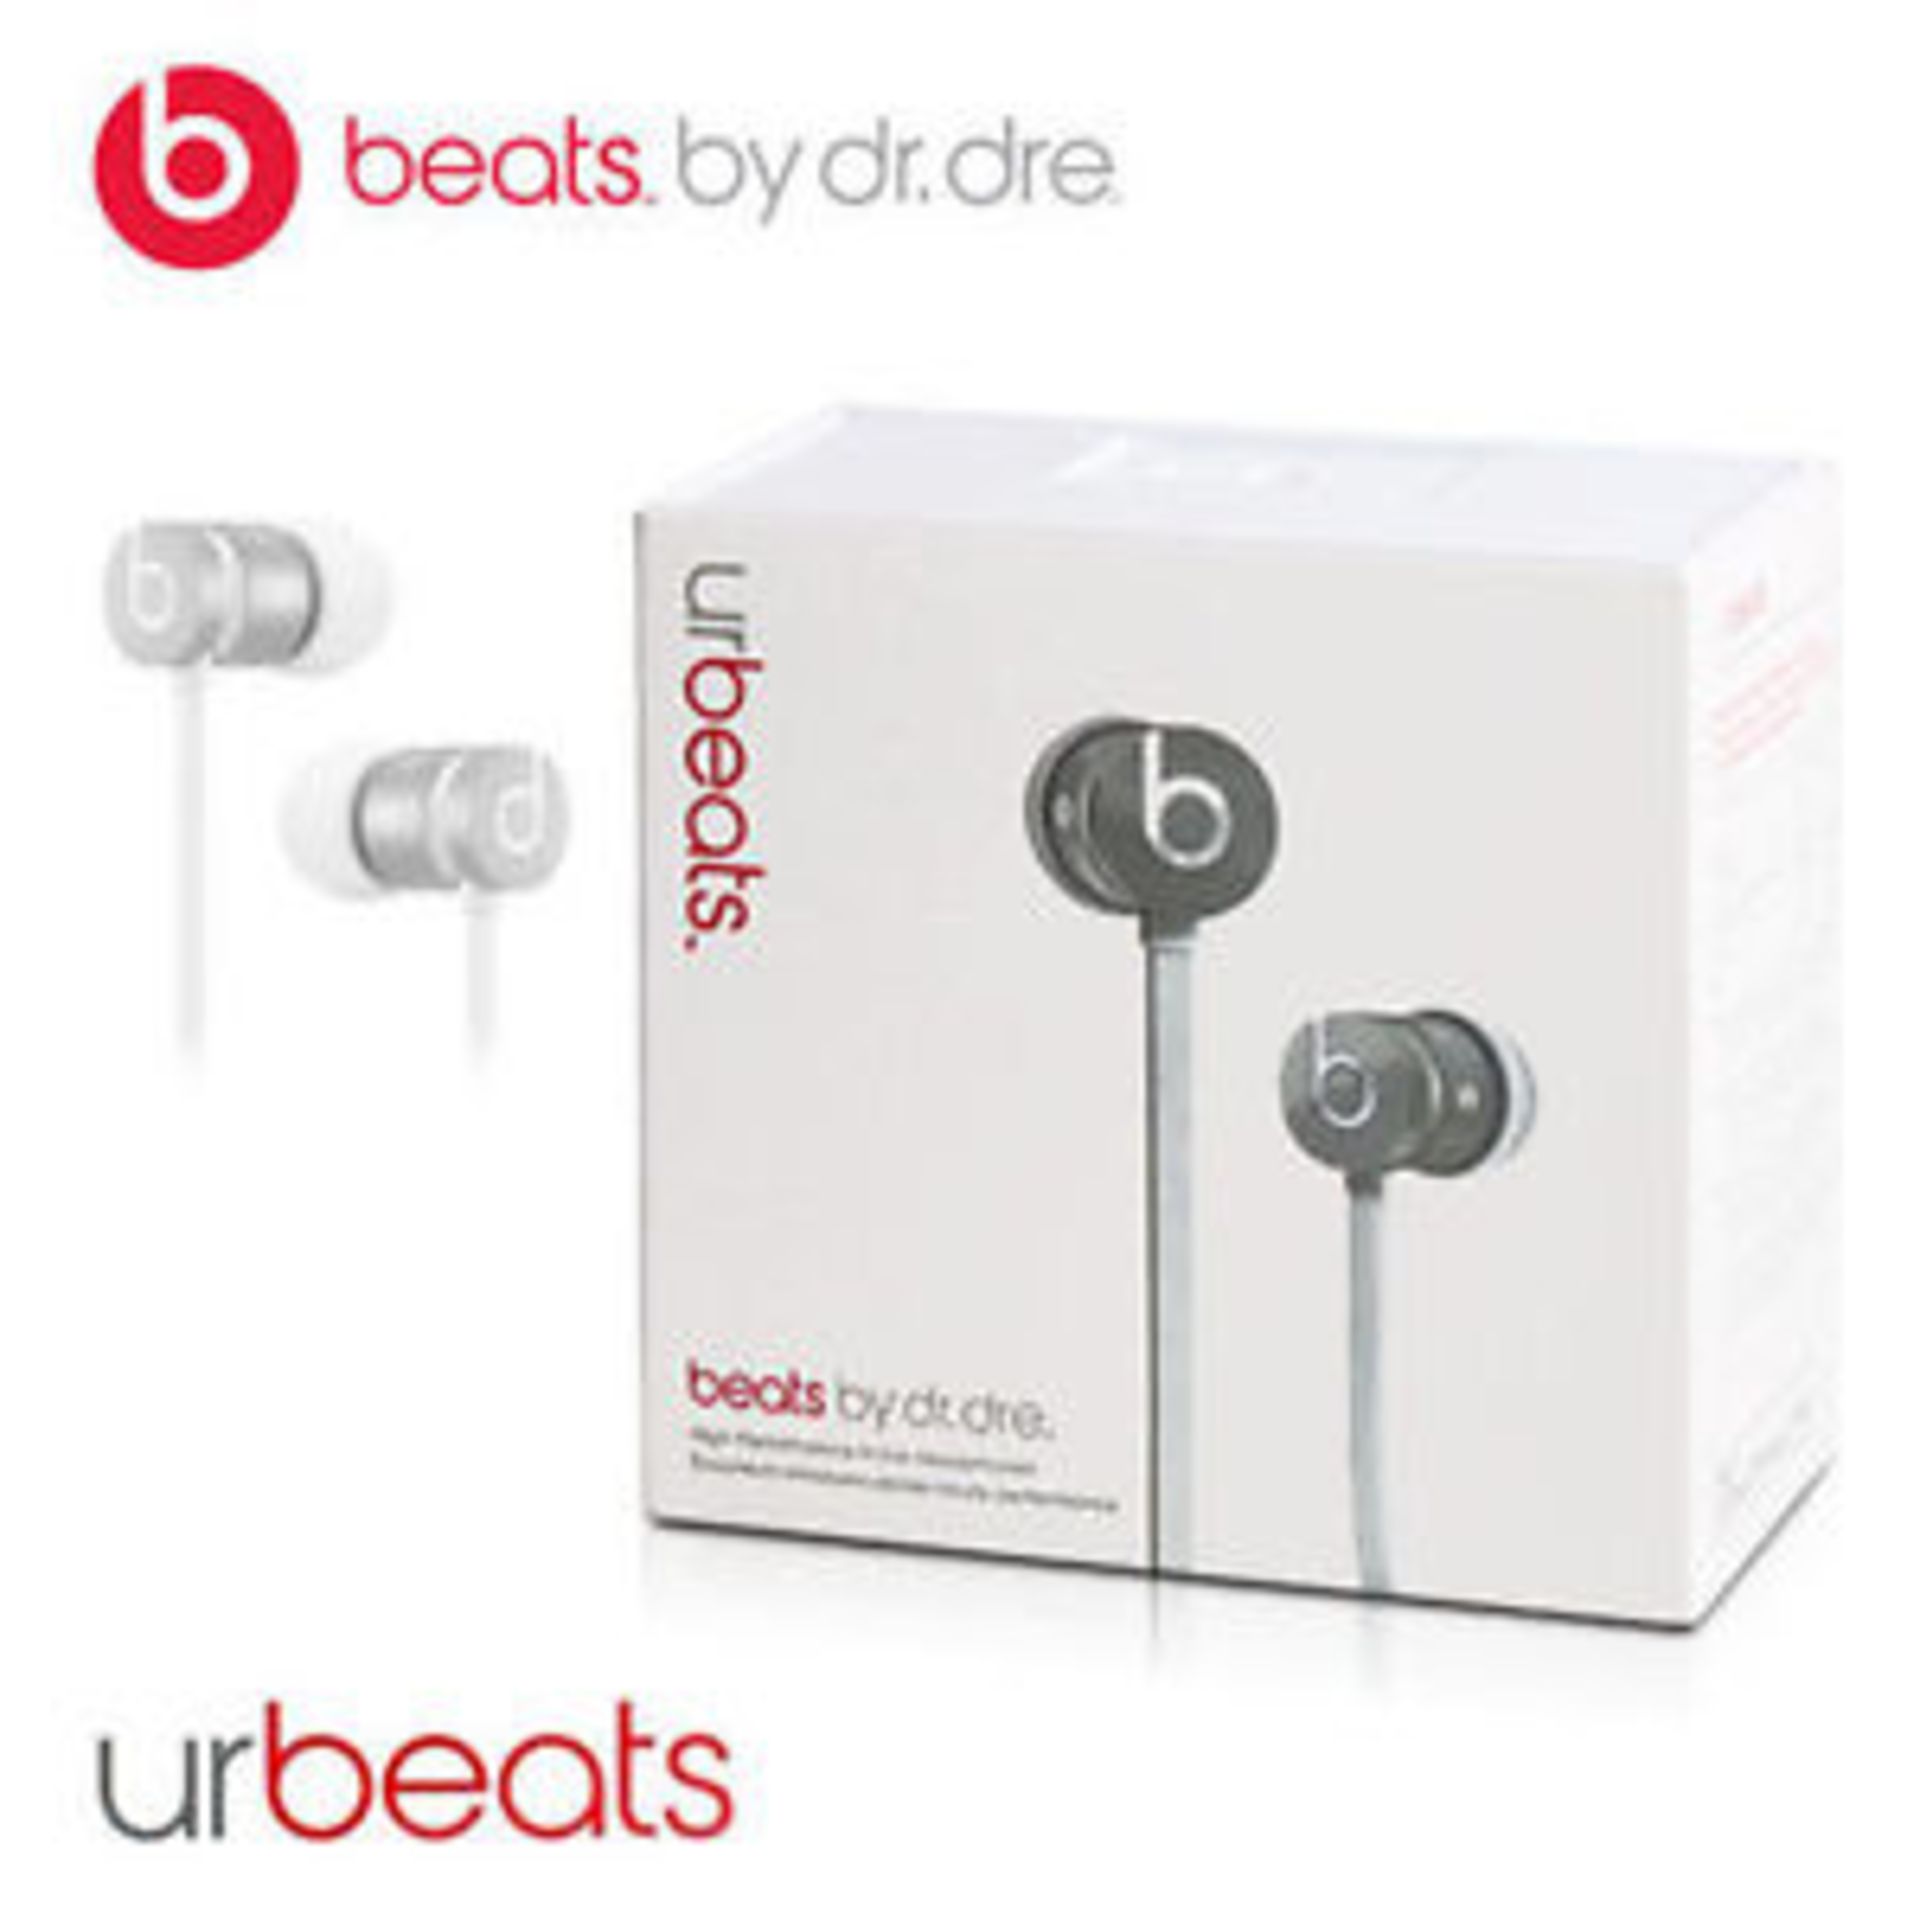 V *TRADE QTY* Brand New Beats By Dr Dre urBeats Earphones - Silver - These are boxed and sealed -